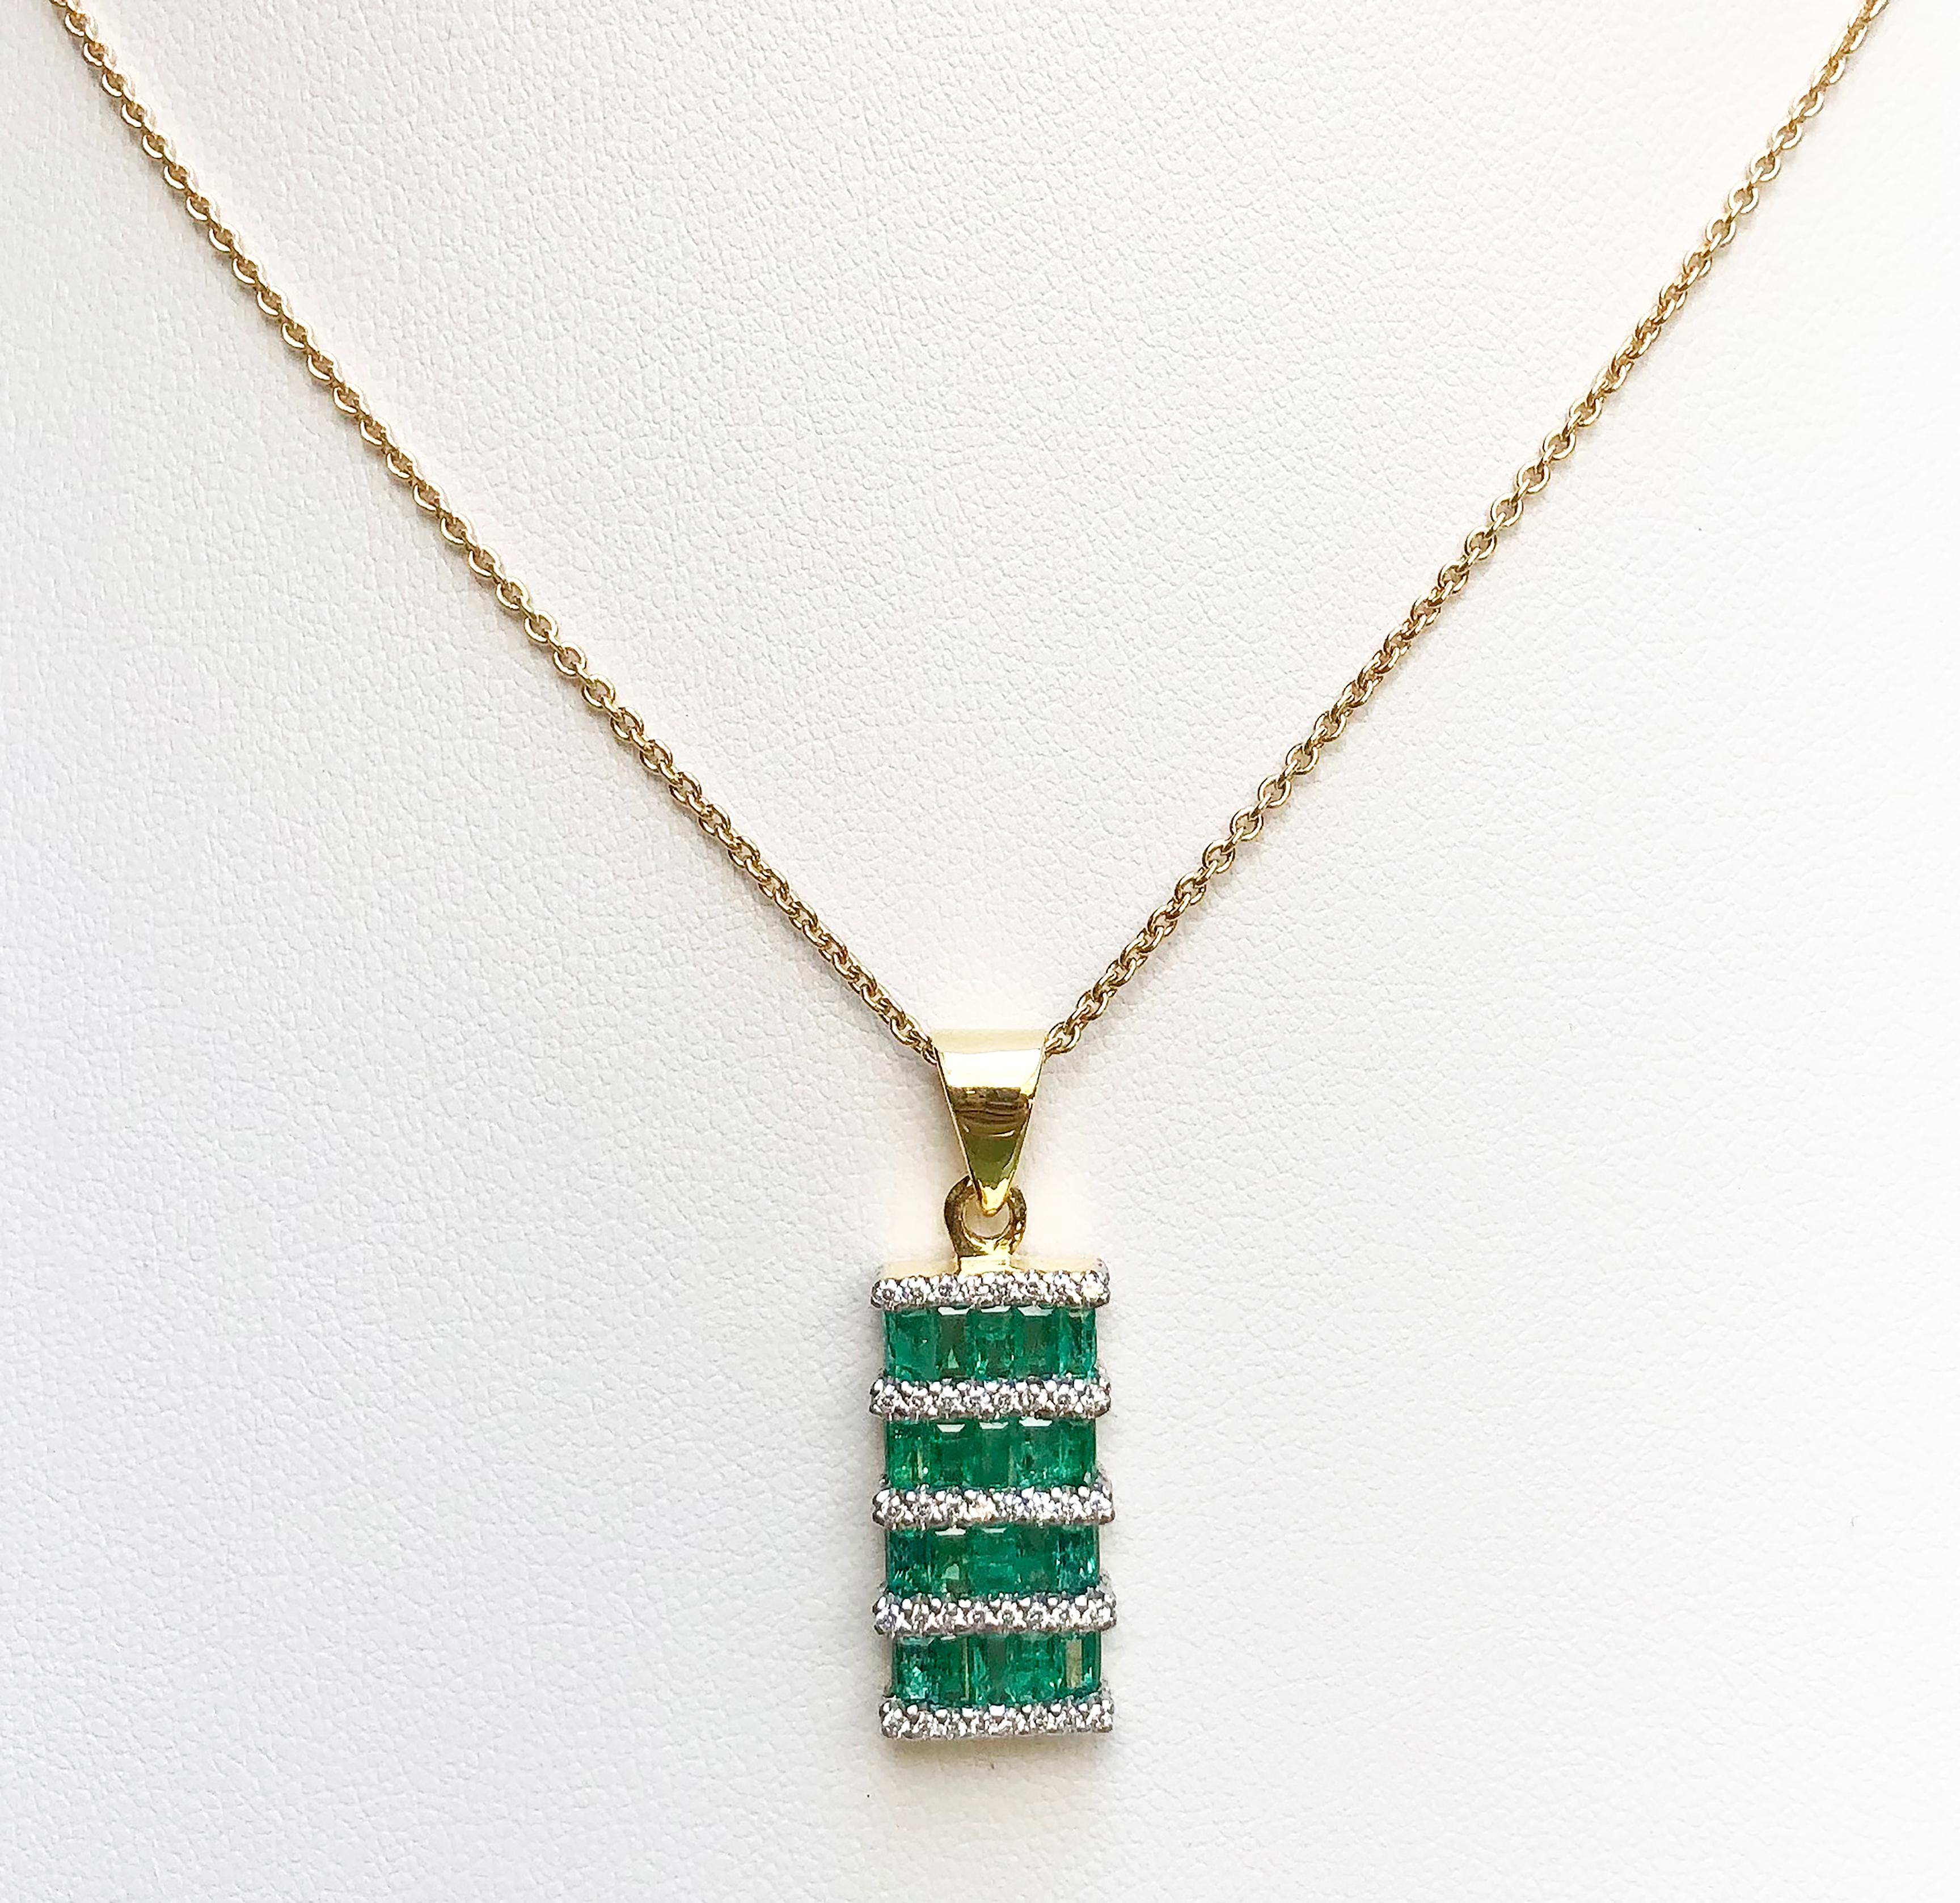 Emerald 1.94 carats with Diamond 0.28 carat Pendant set in 18 Karat Gold Settings
(chain not included)

Width:  1.0 cm 
Length: 3.0 cm
Total Weight: 5.49 grams

